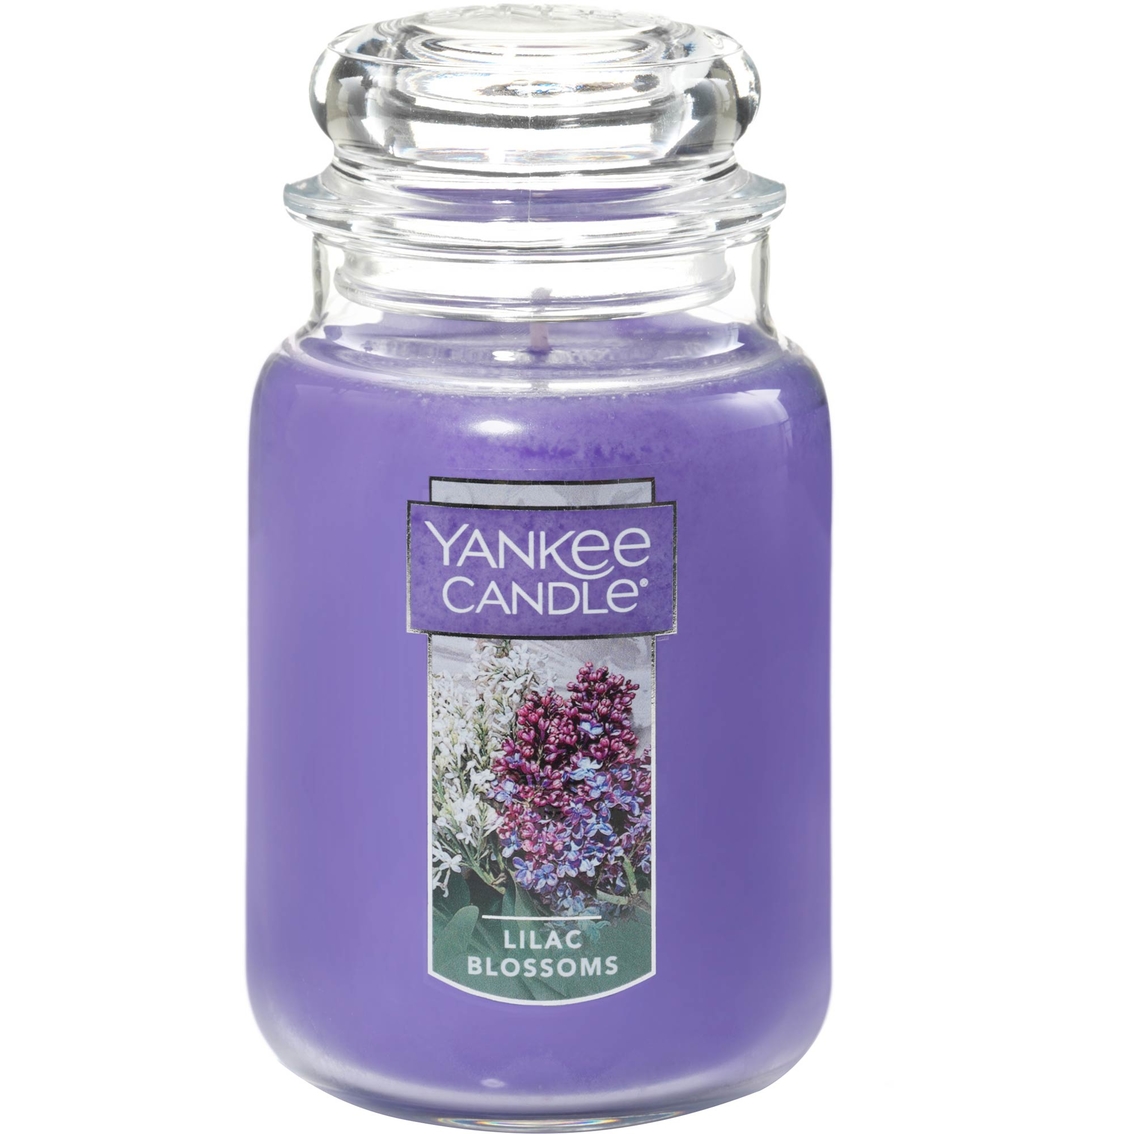 Yankee Candle Lilac Blossom Large Jar Candle | Candles & Home Fragrance ...